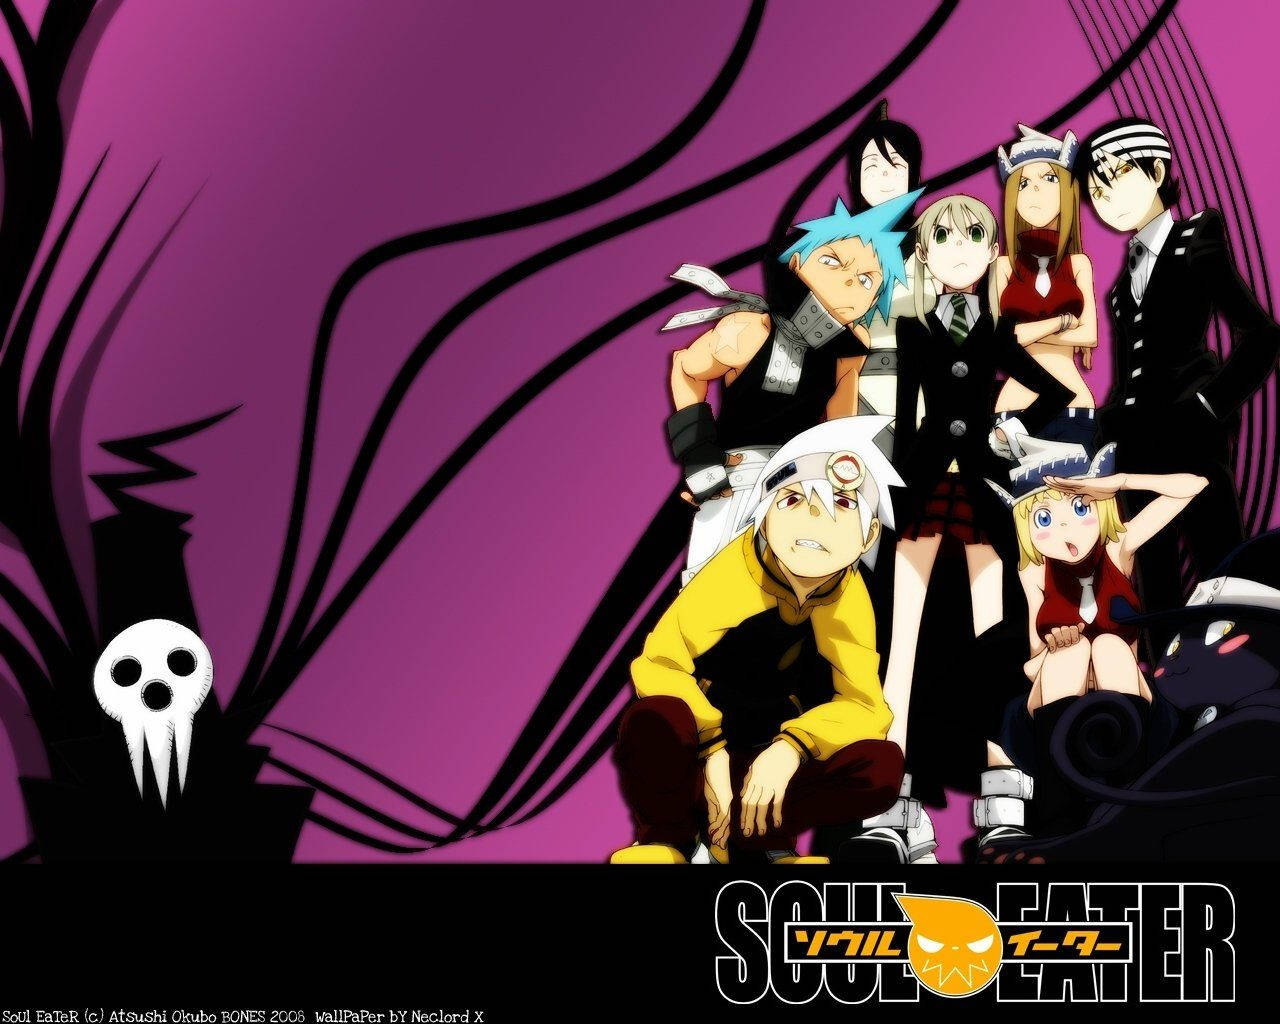 1280X1024 Soul Eater Wallpaper and Background